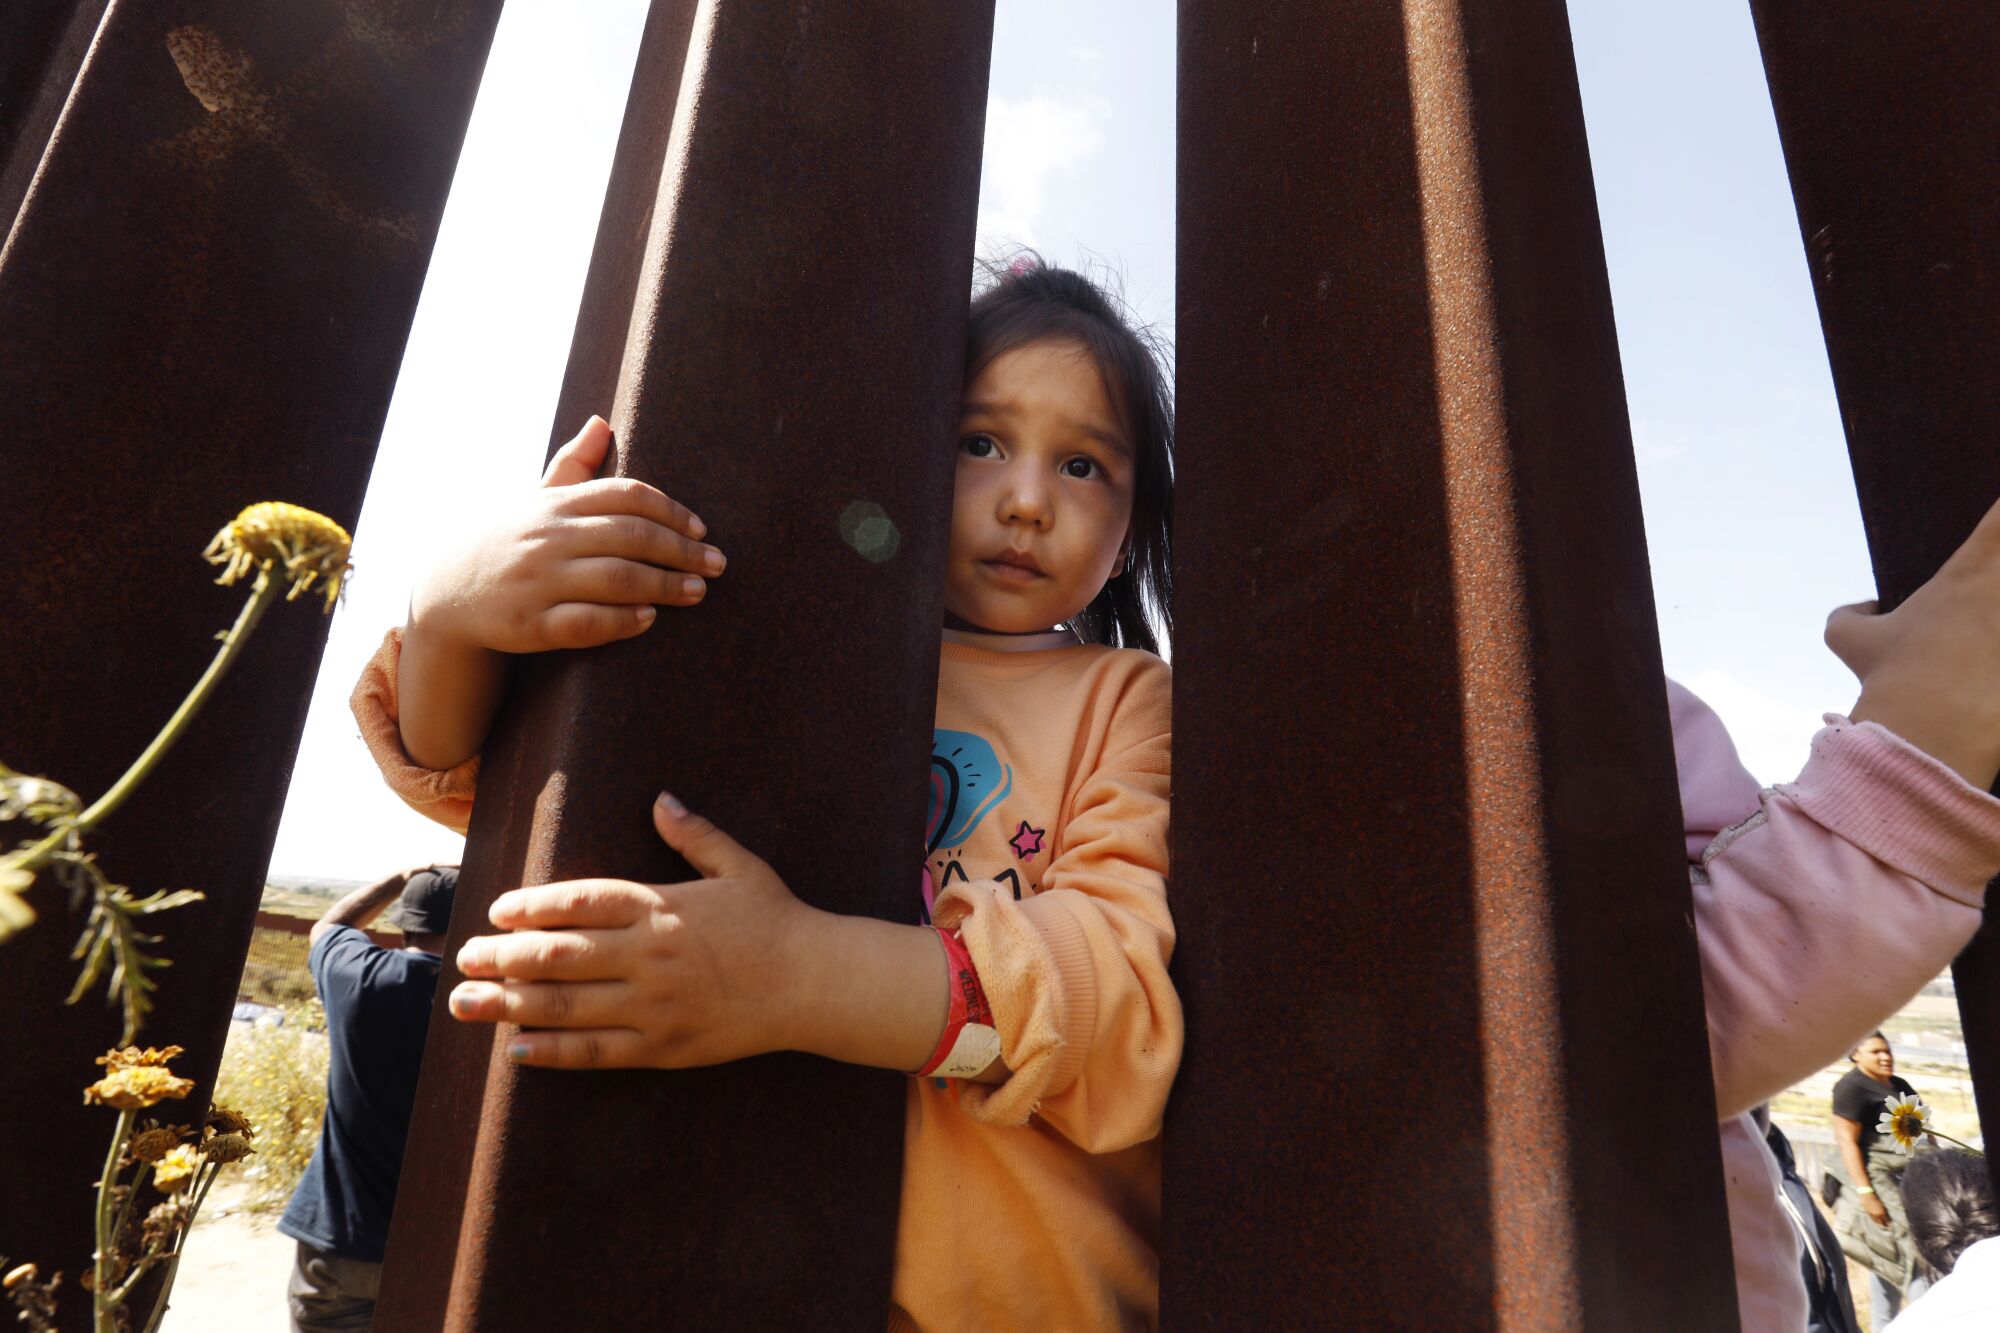 Mahya, age 4, from Afghanisan is waiting with her family to get into the U.S. at the U.S.- Mexico border in Tijuana.